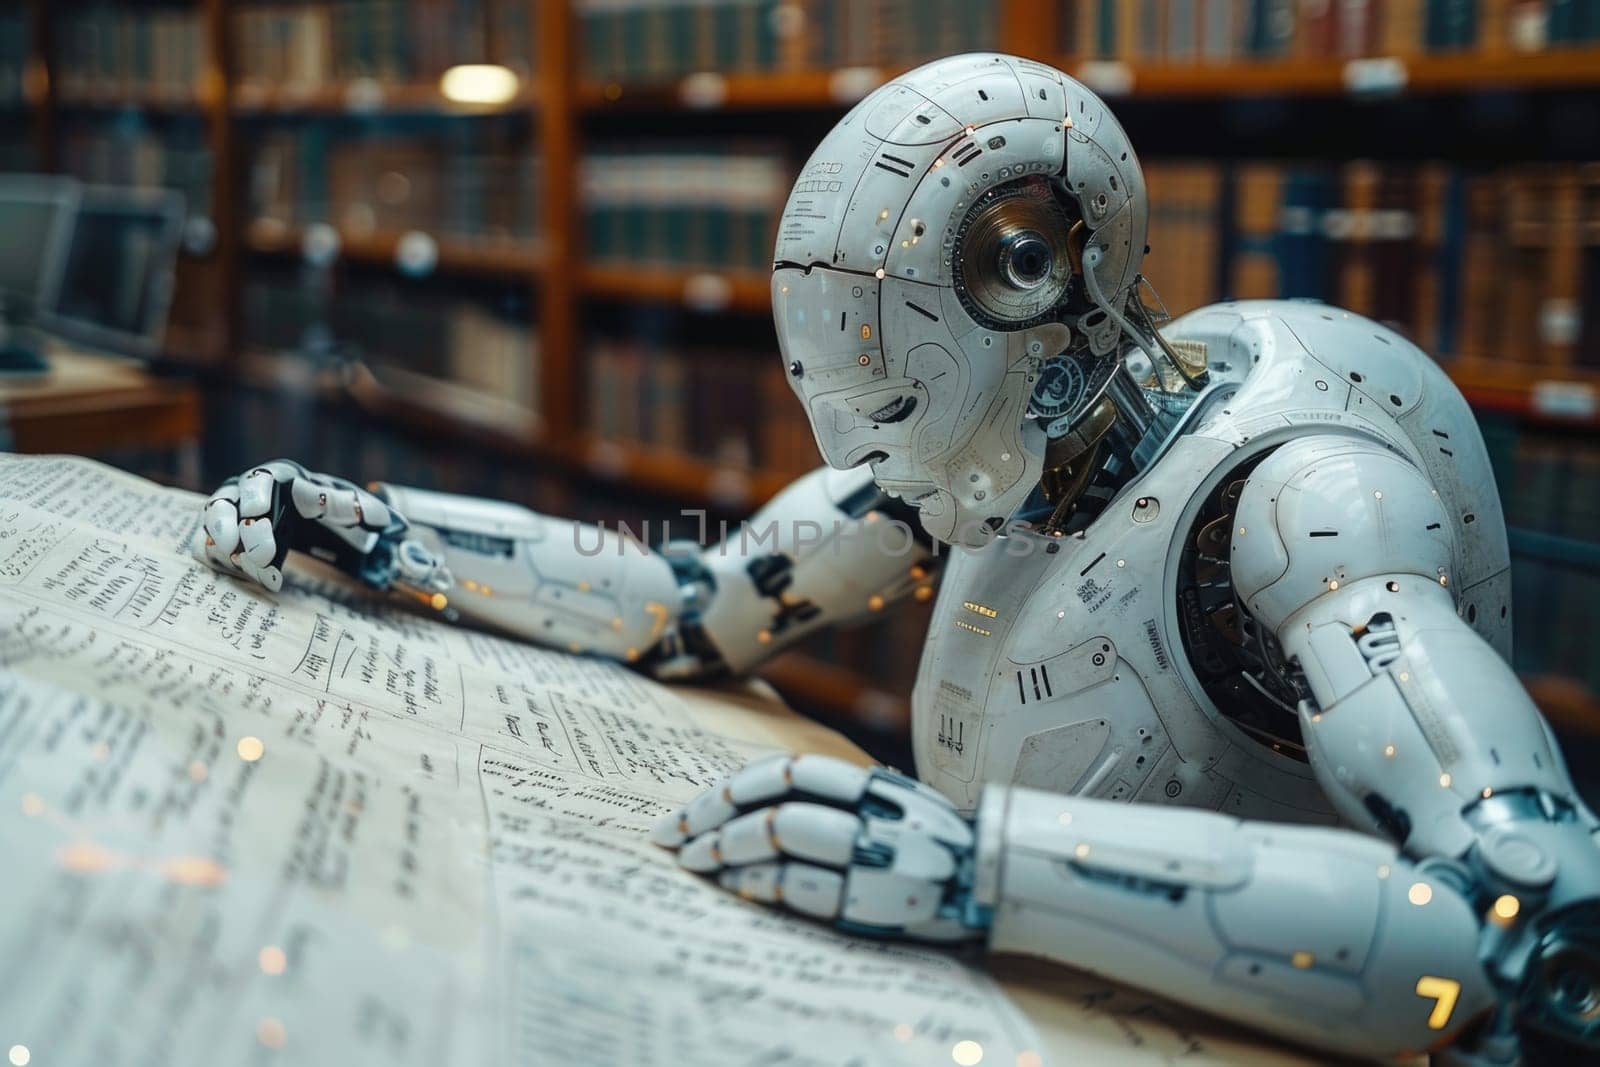 Robot Studying Book in Library by but_photo